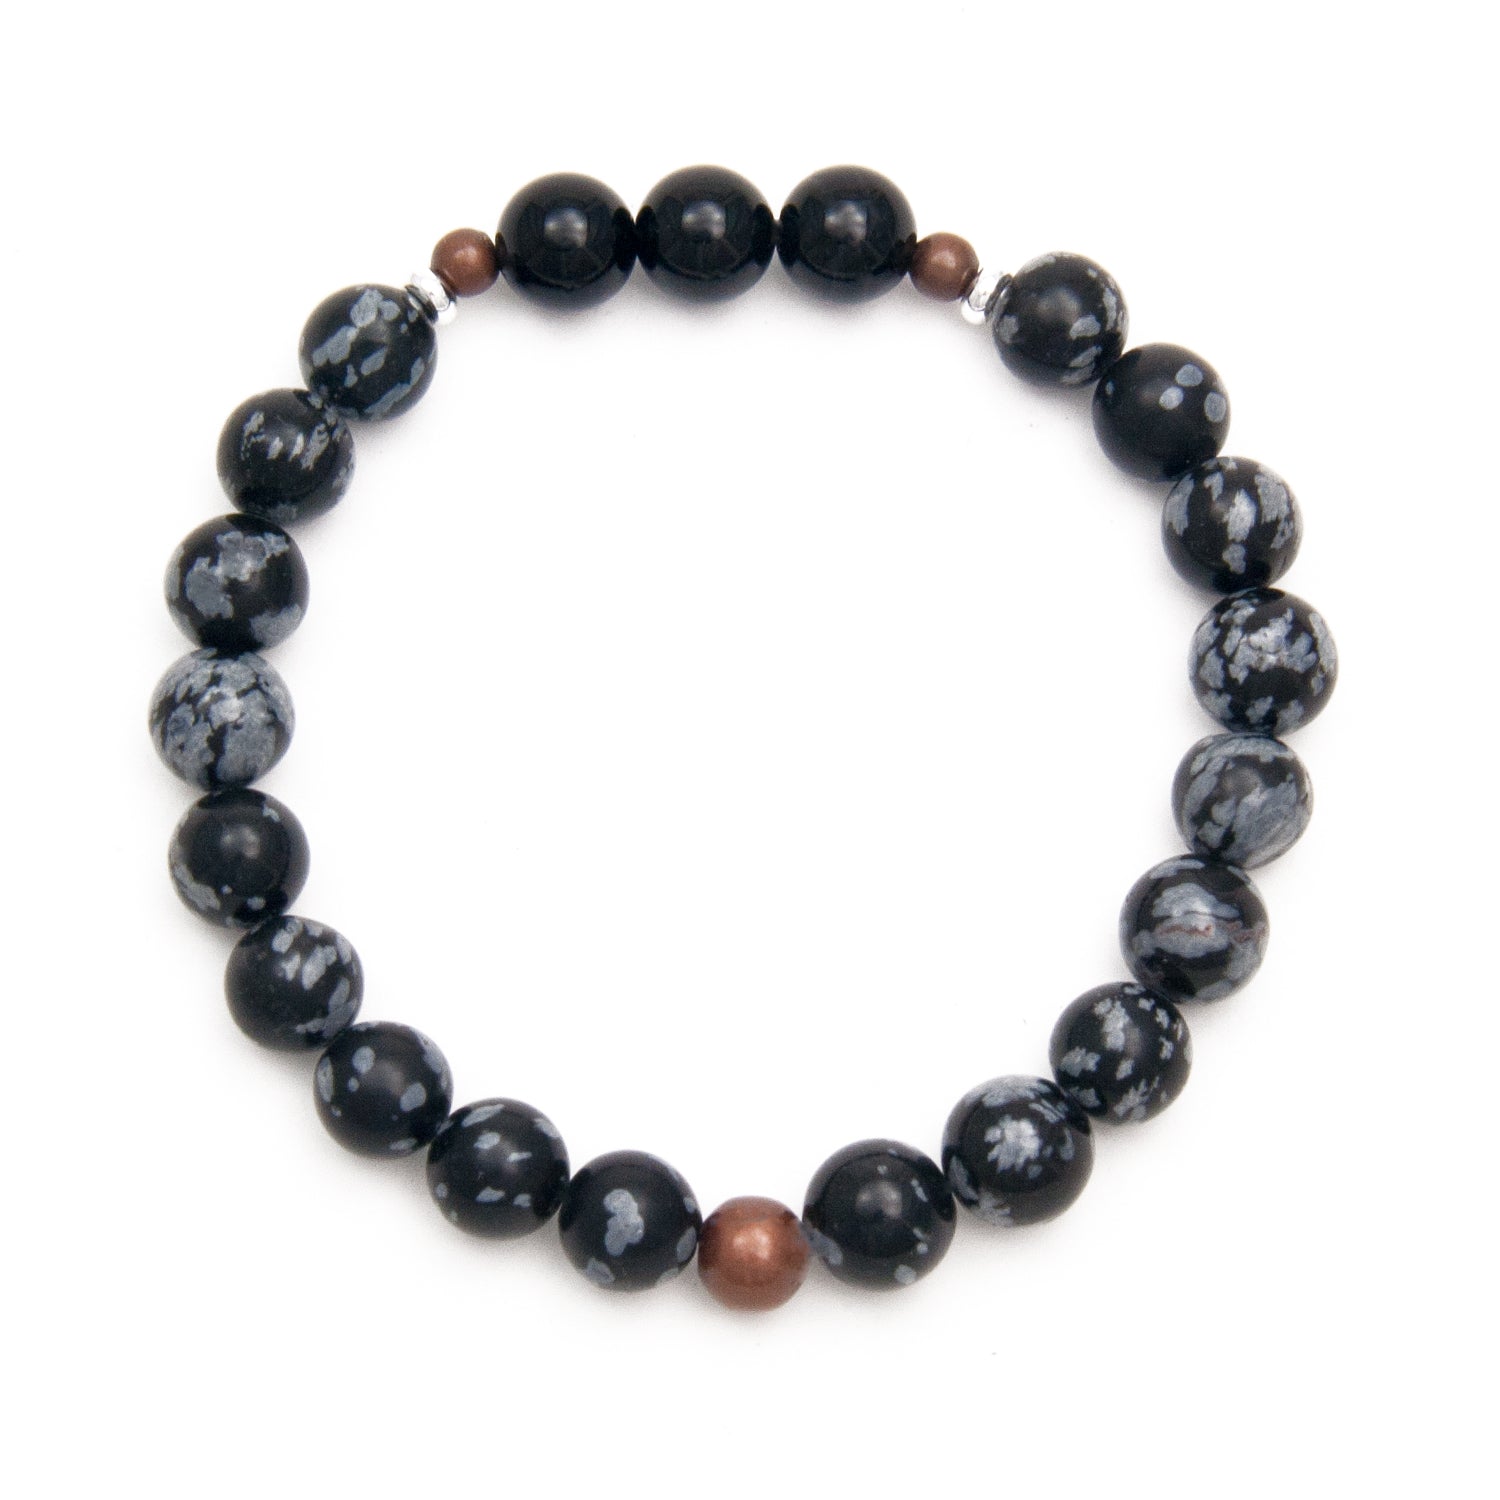 Amazon.com: Triple Protection Bracelet - For Protection - Bring Luck And  Prosperity - Hematite - Black Obsidian - Tiger Eye - Stone Bracelet :  Handmade Products